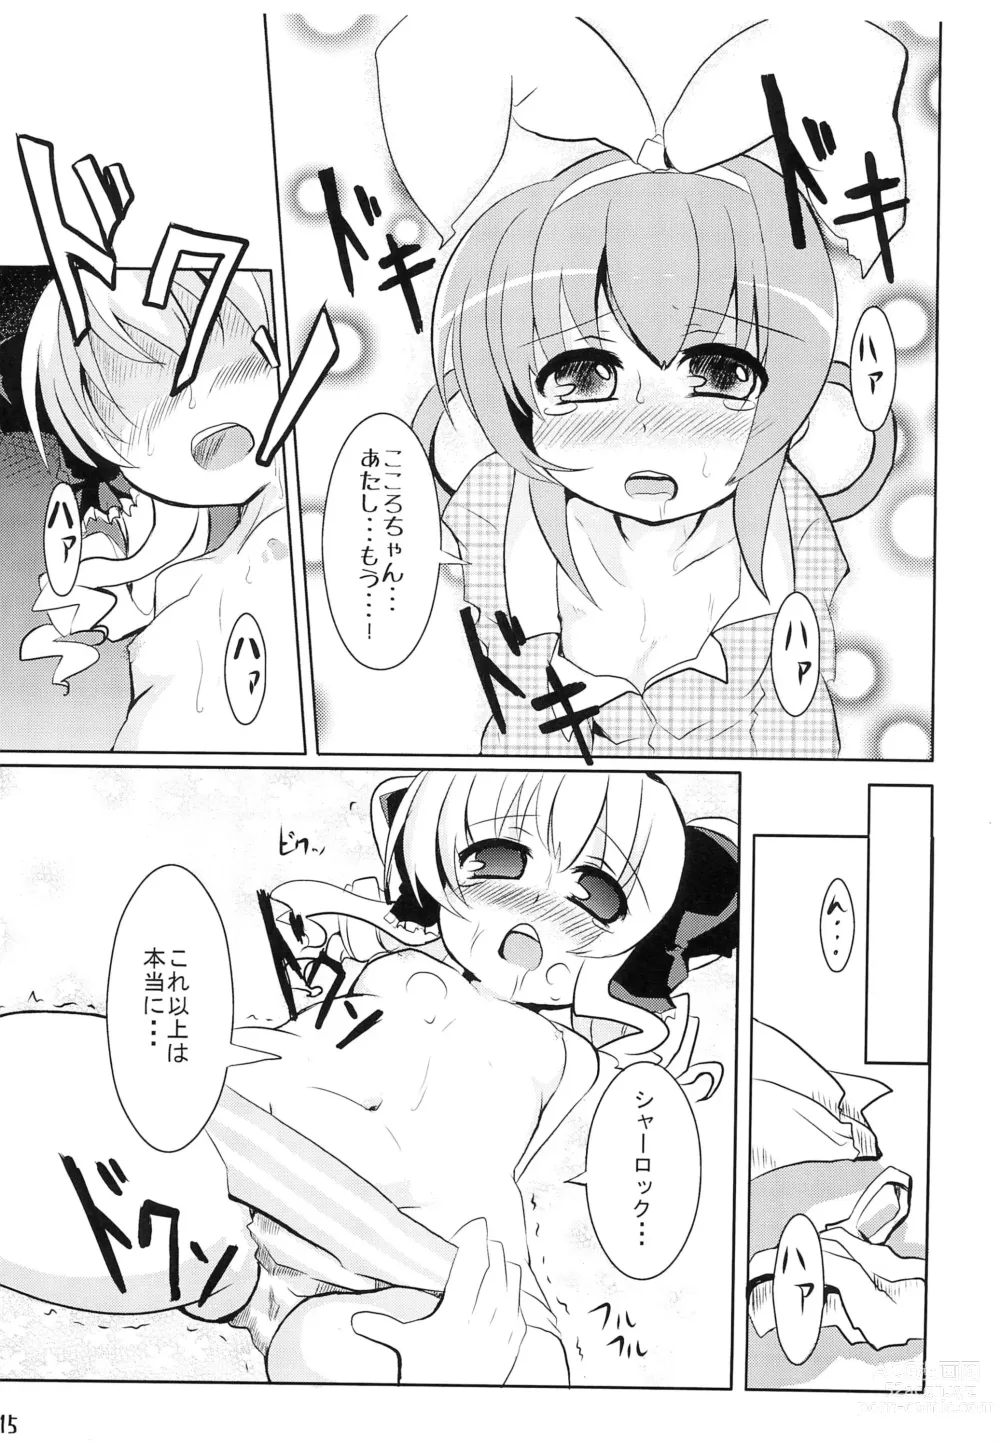 Page 15 of doujinshi Milky Syrup